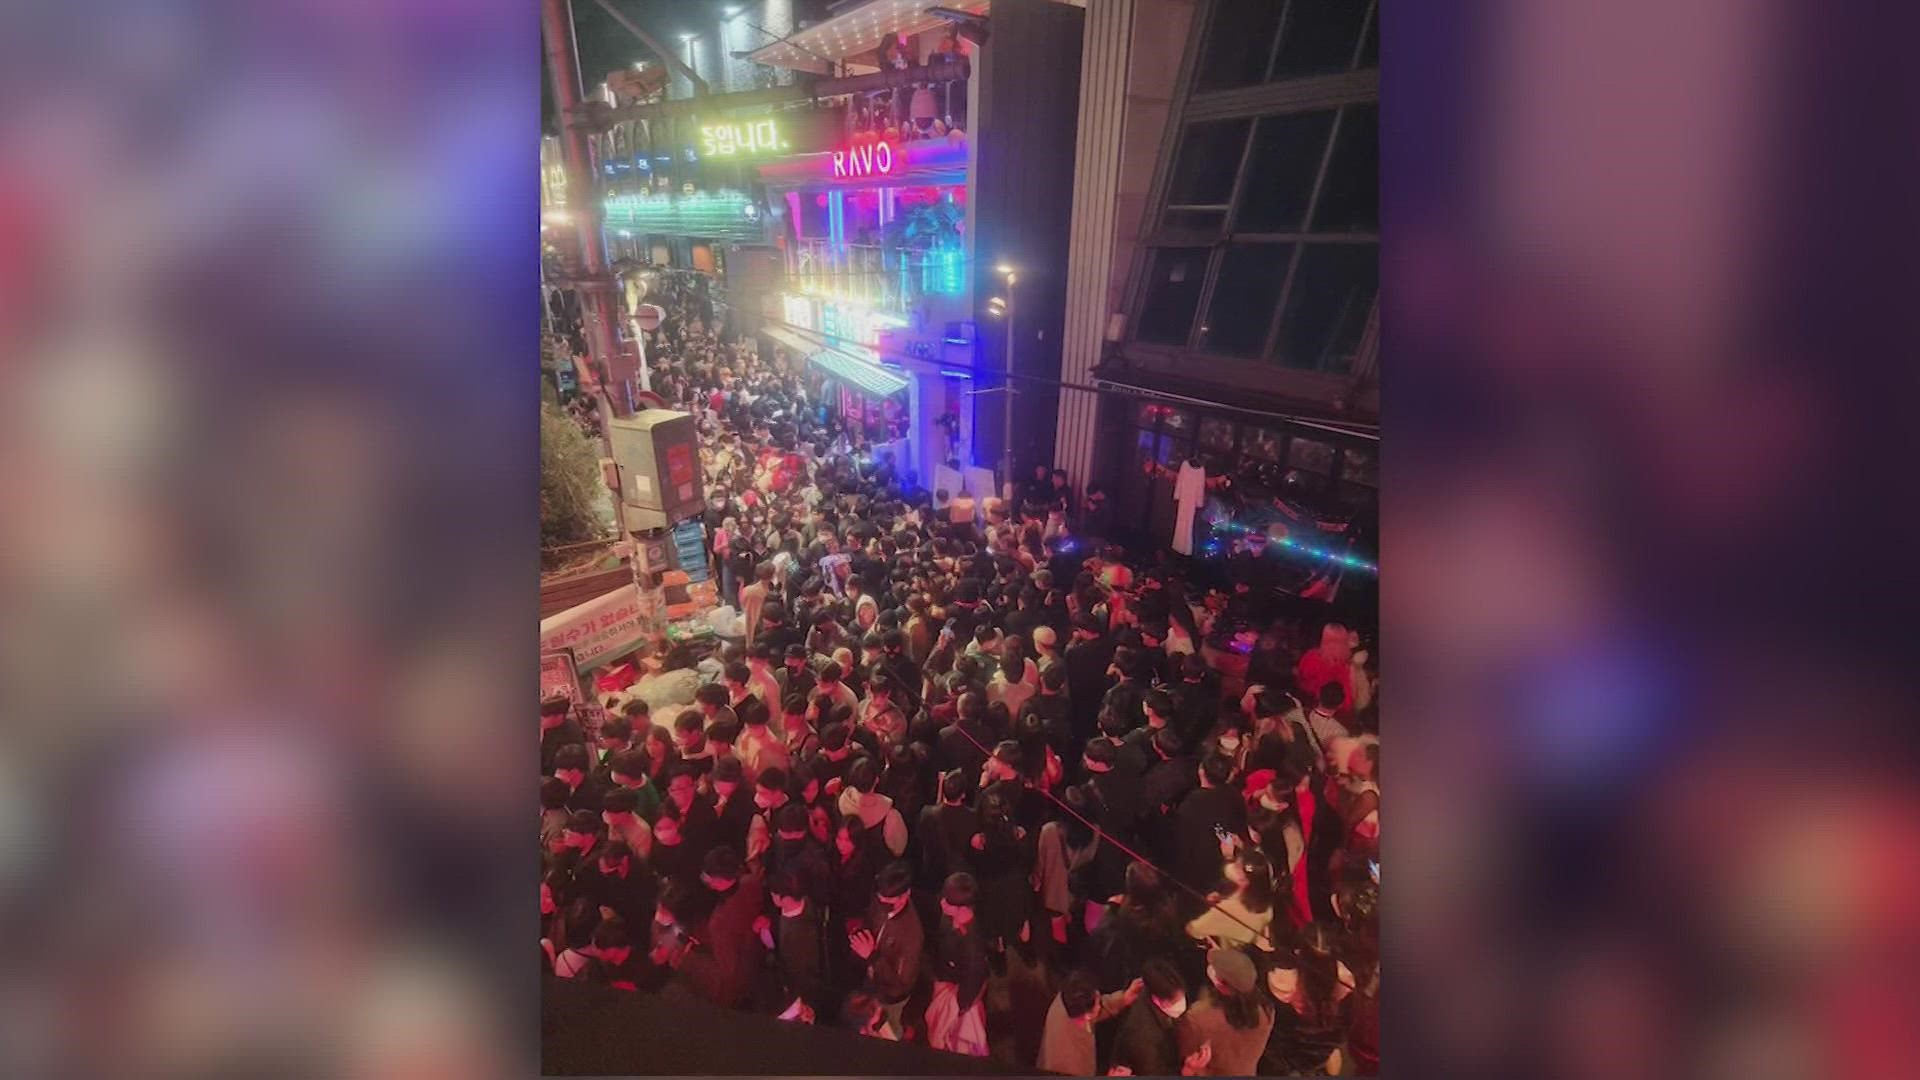 Police said the victims were crushed by a large crowd pushing through a narrow street during Halloween festivities.